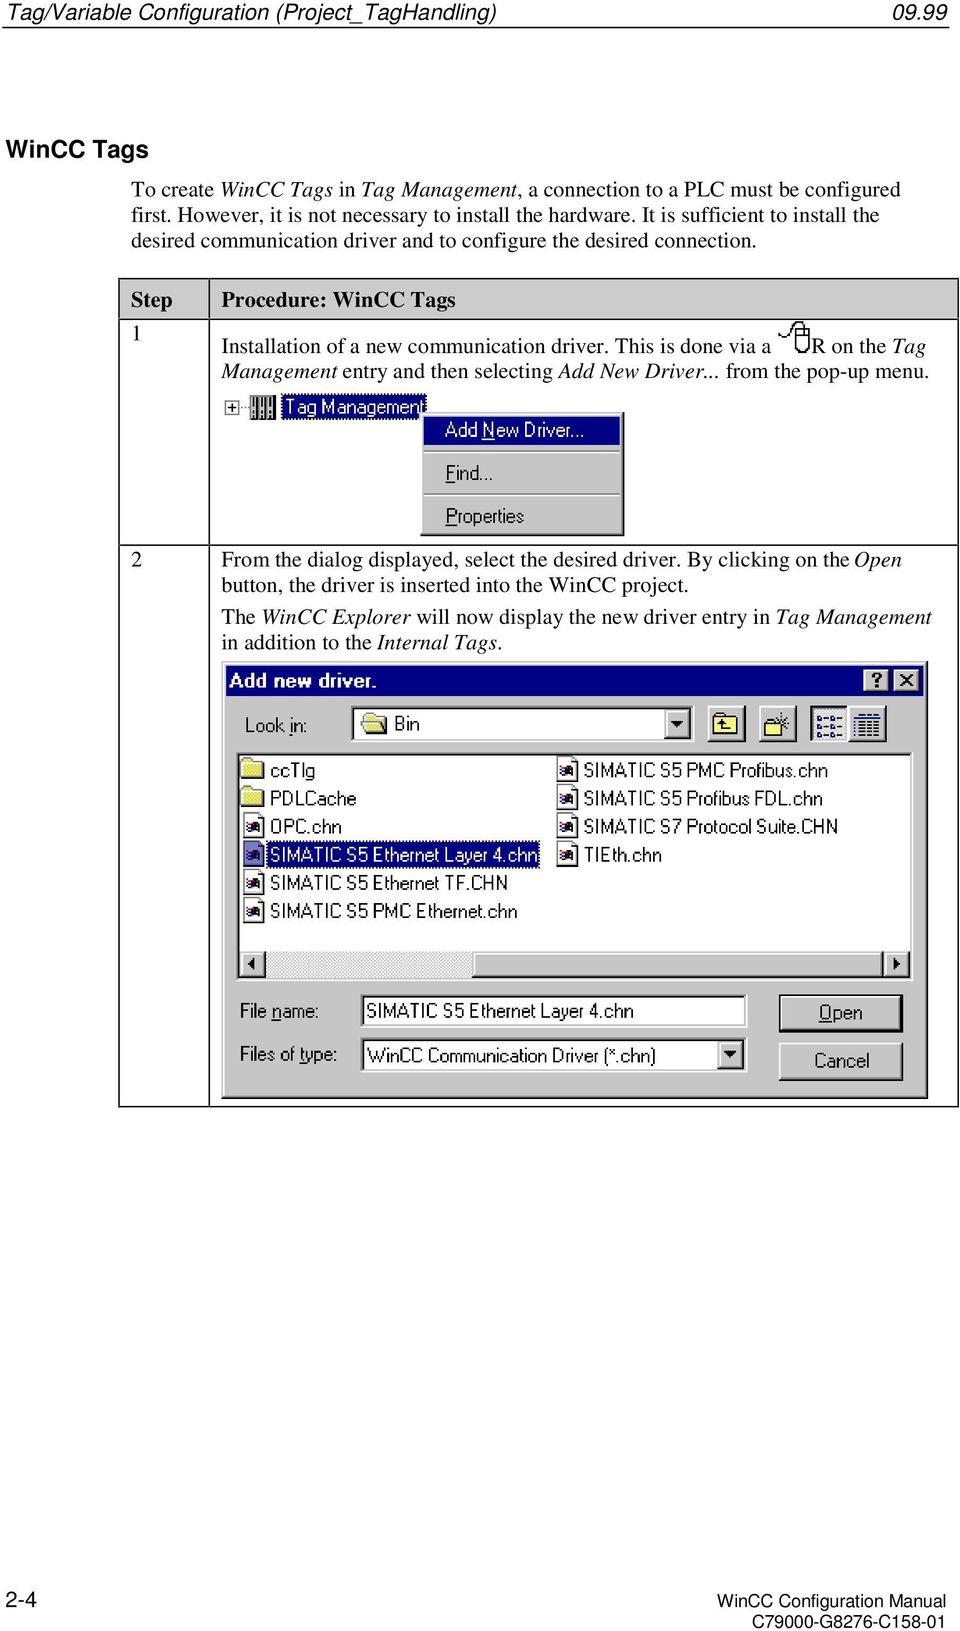 Step 1 Procedure: WinCC Tags Installation of a new communication driver. This is done via a R on the Tag Management entry and then selecting Add New Driver... from the pop-up menu.